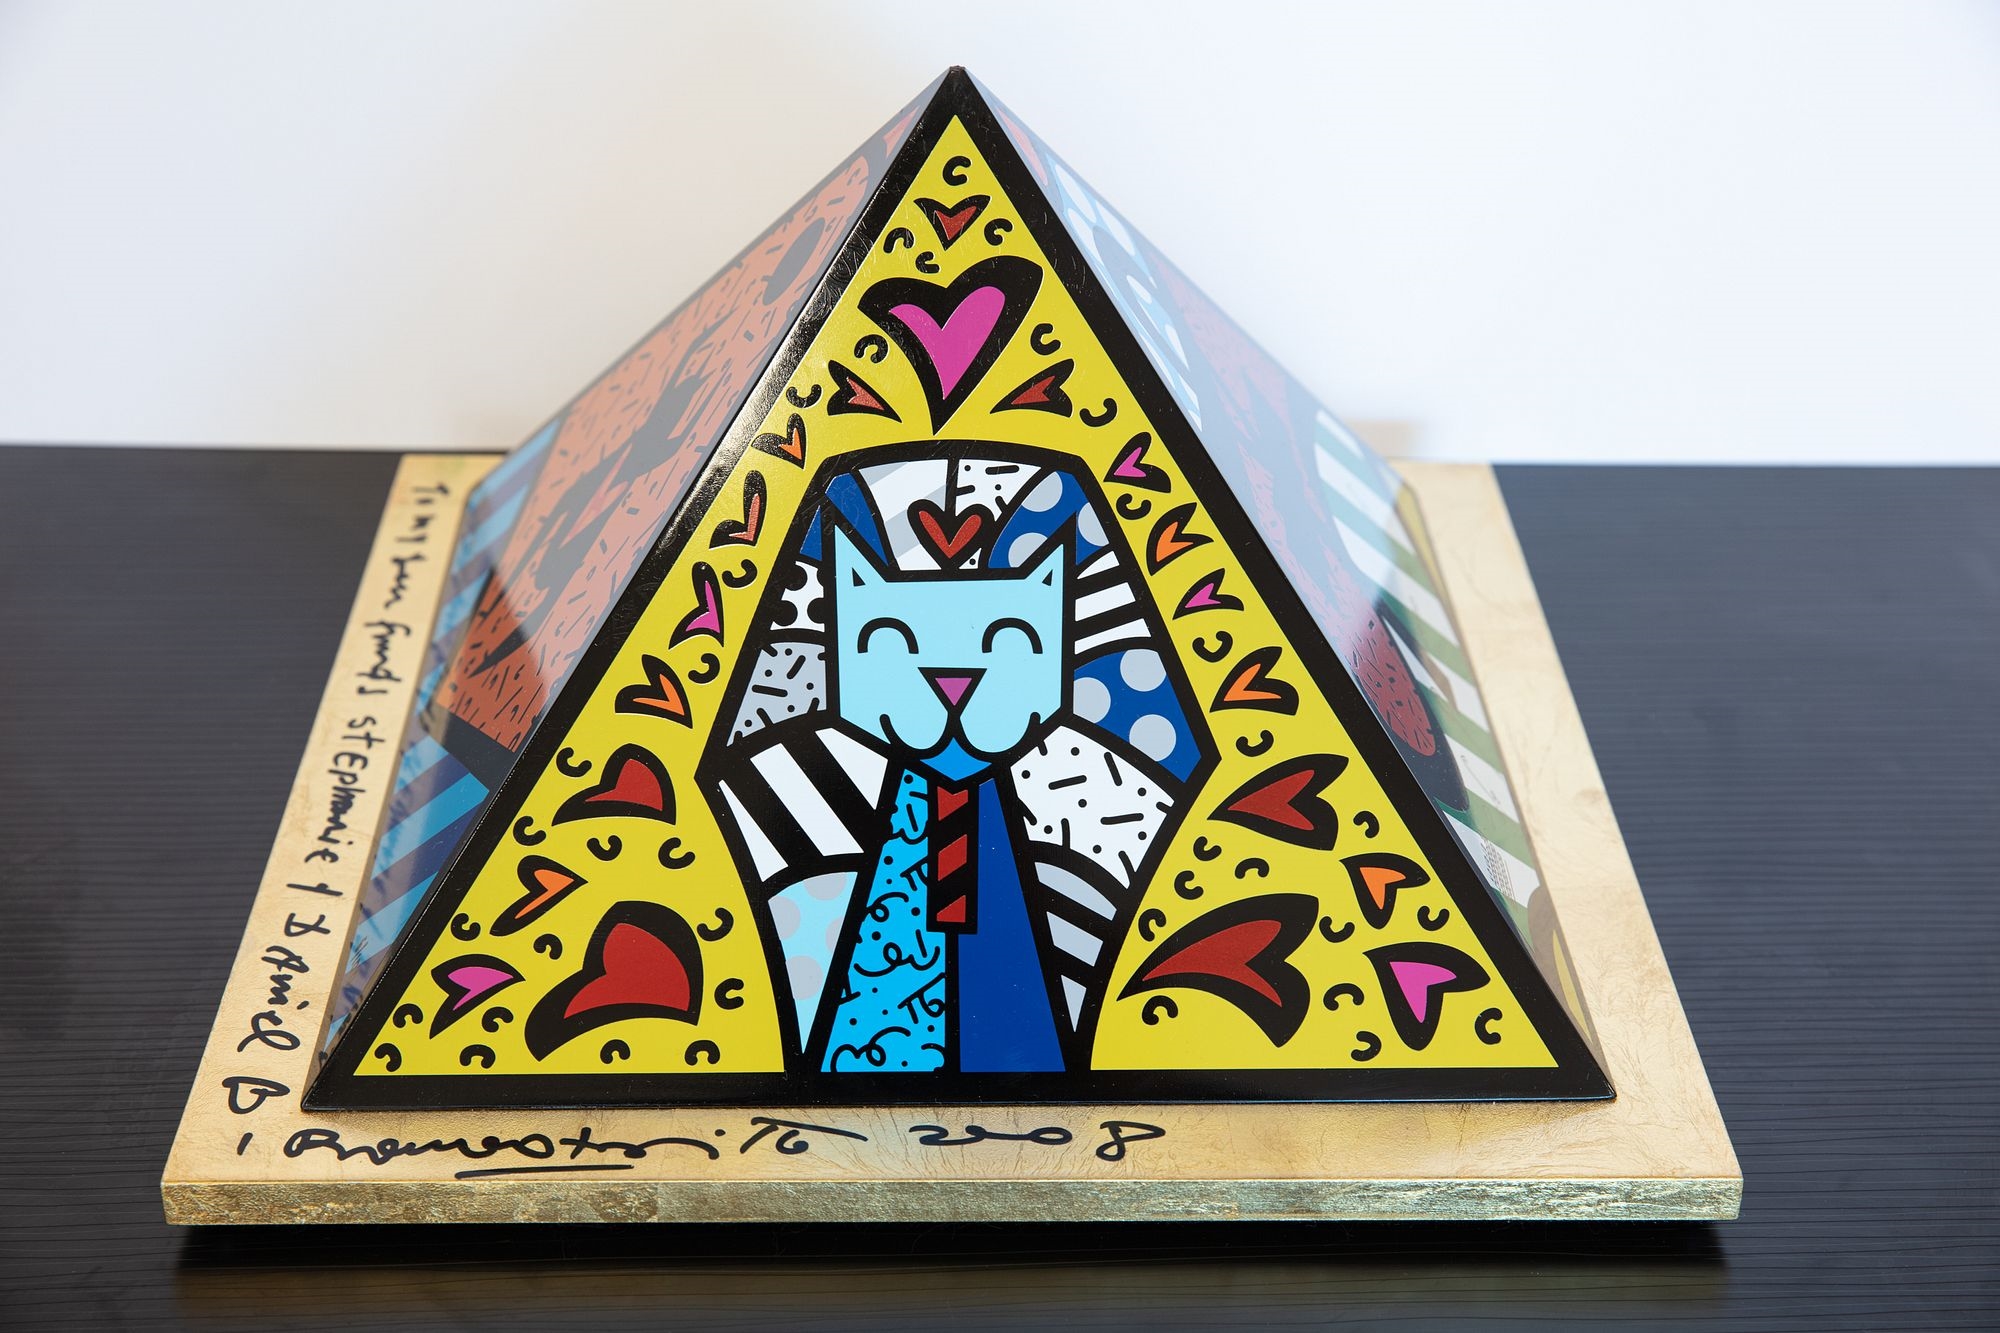 Artwork by Romero Britto, Pyramid, Made of cardboard and newspaper